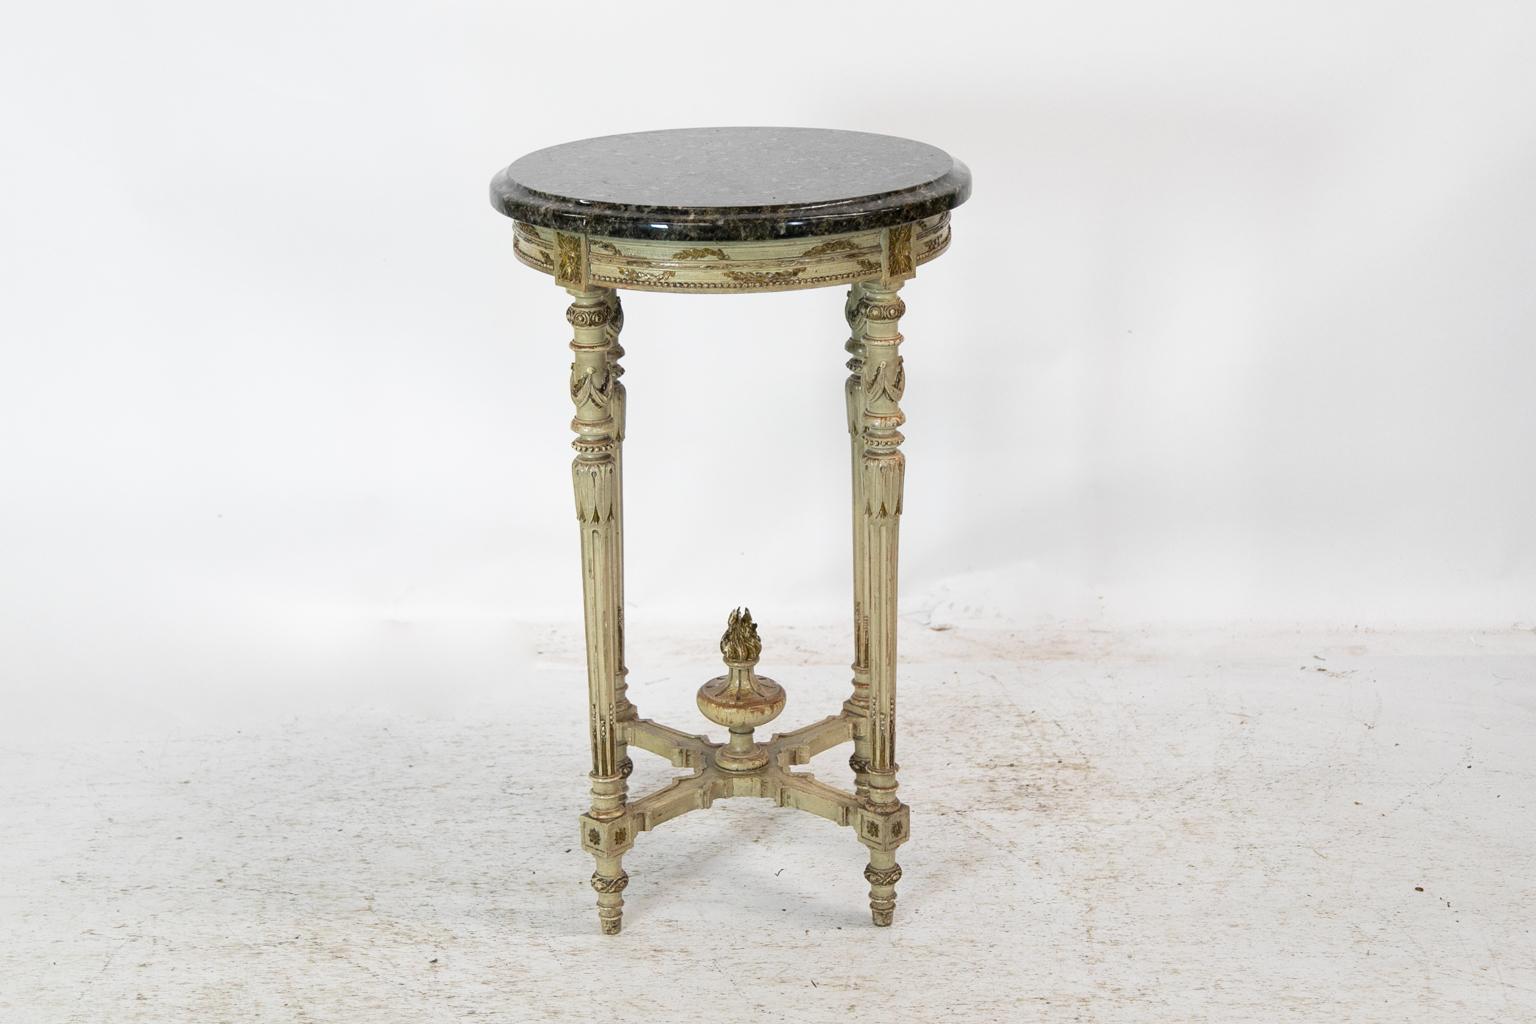 This occasional table has an apron with carved leaf swags and a repeating bead molding highlighted with gold. The legs have drapery swags carved in high relief. Below are carved stylized acanthus leaves and stop fluted legs. The legs are connected